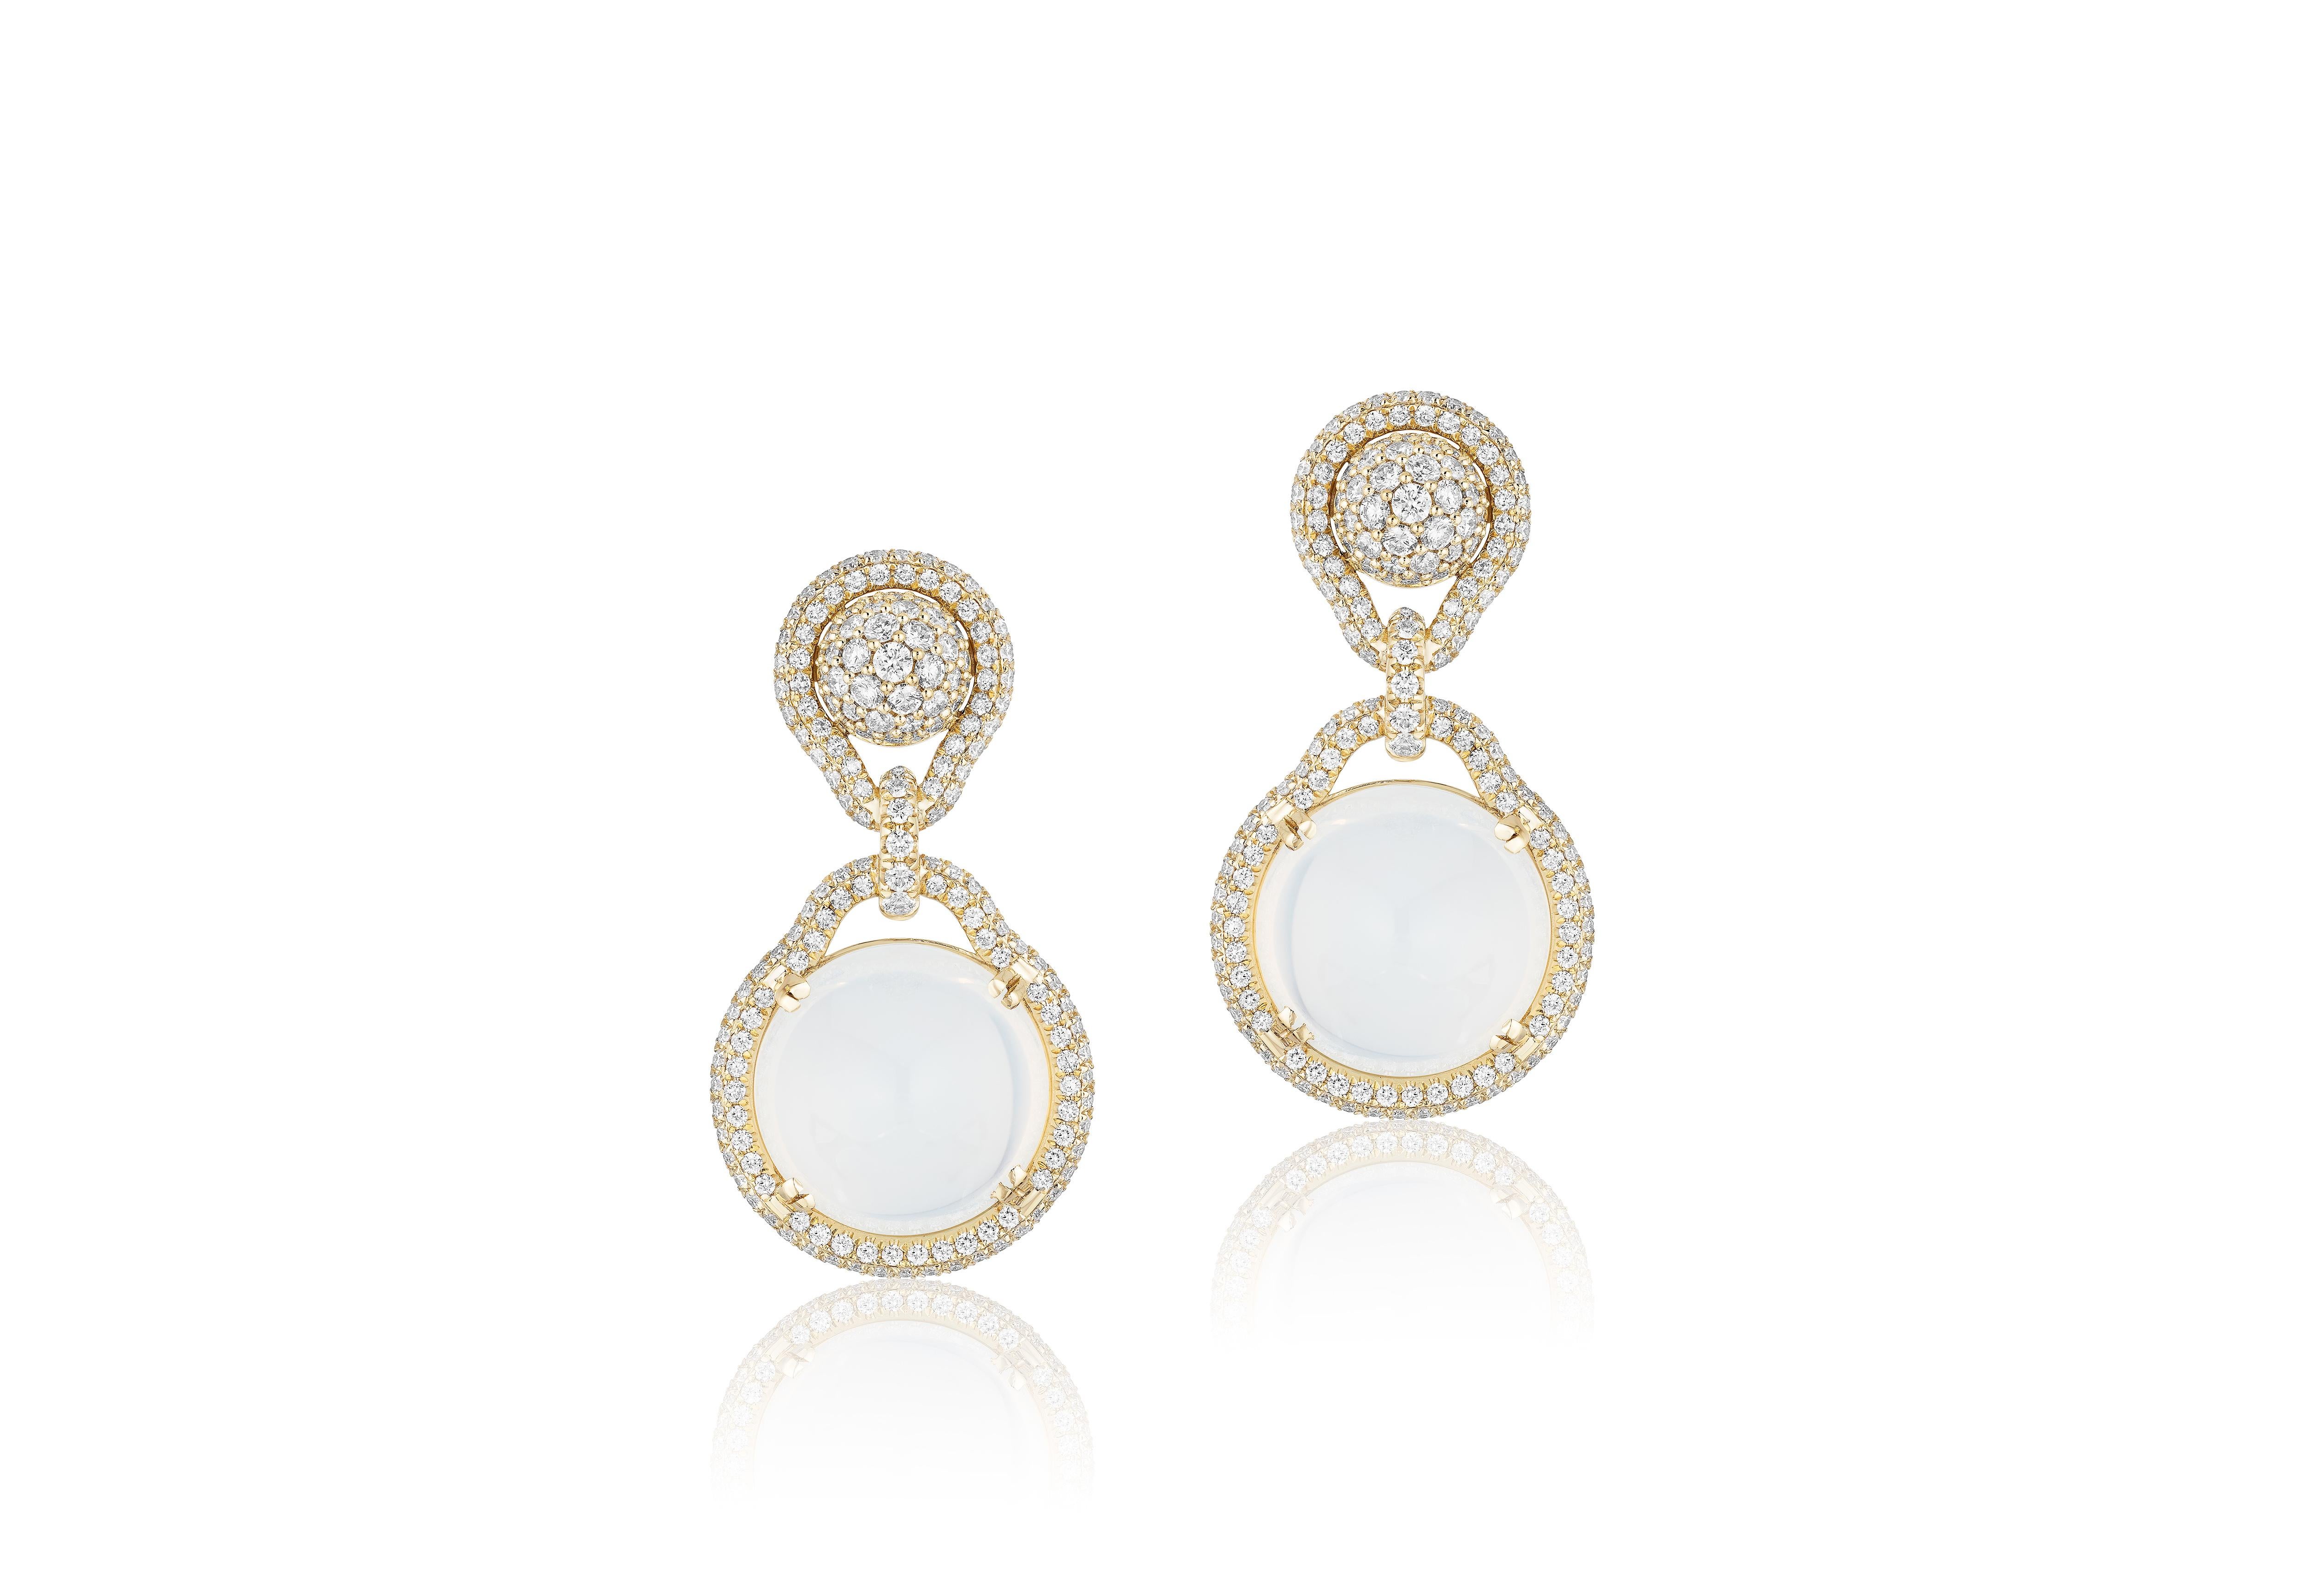 Moon Quartz Cab Earring With Diamonds in 18K Yellow Gold, from 'Rock N Roll' Collection

Gemstone Weight:  Quartz -25.92 Carats

 Diamond: G-H / VS, Approx Wt:2.83 Carats